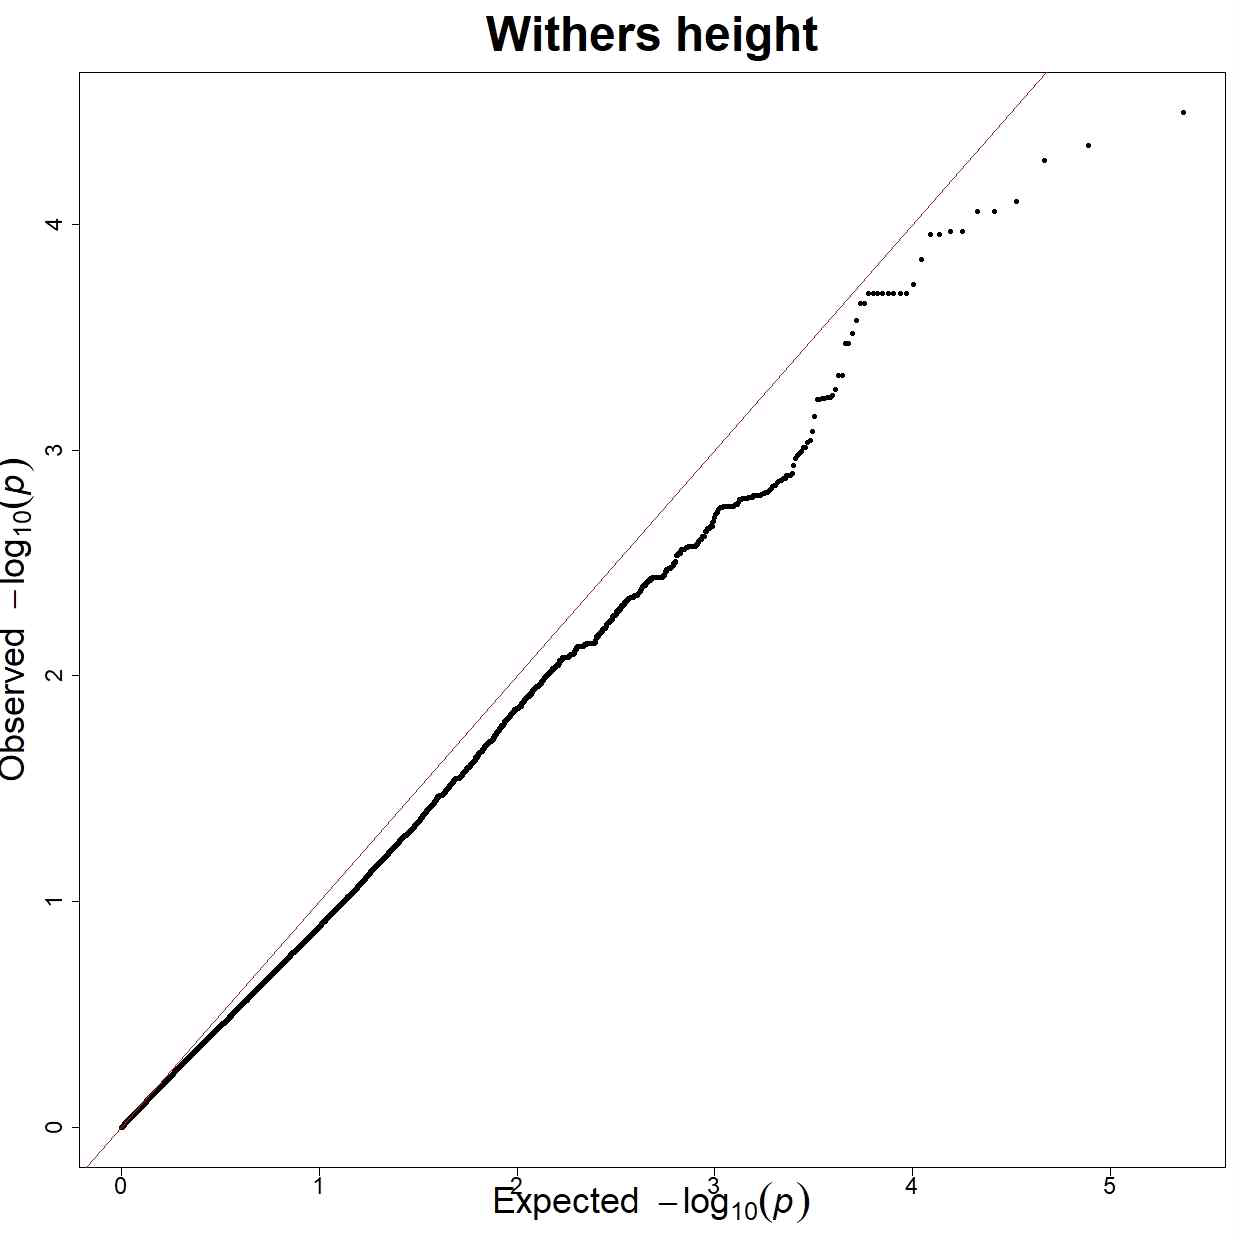 Withers height QQ plot